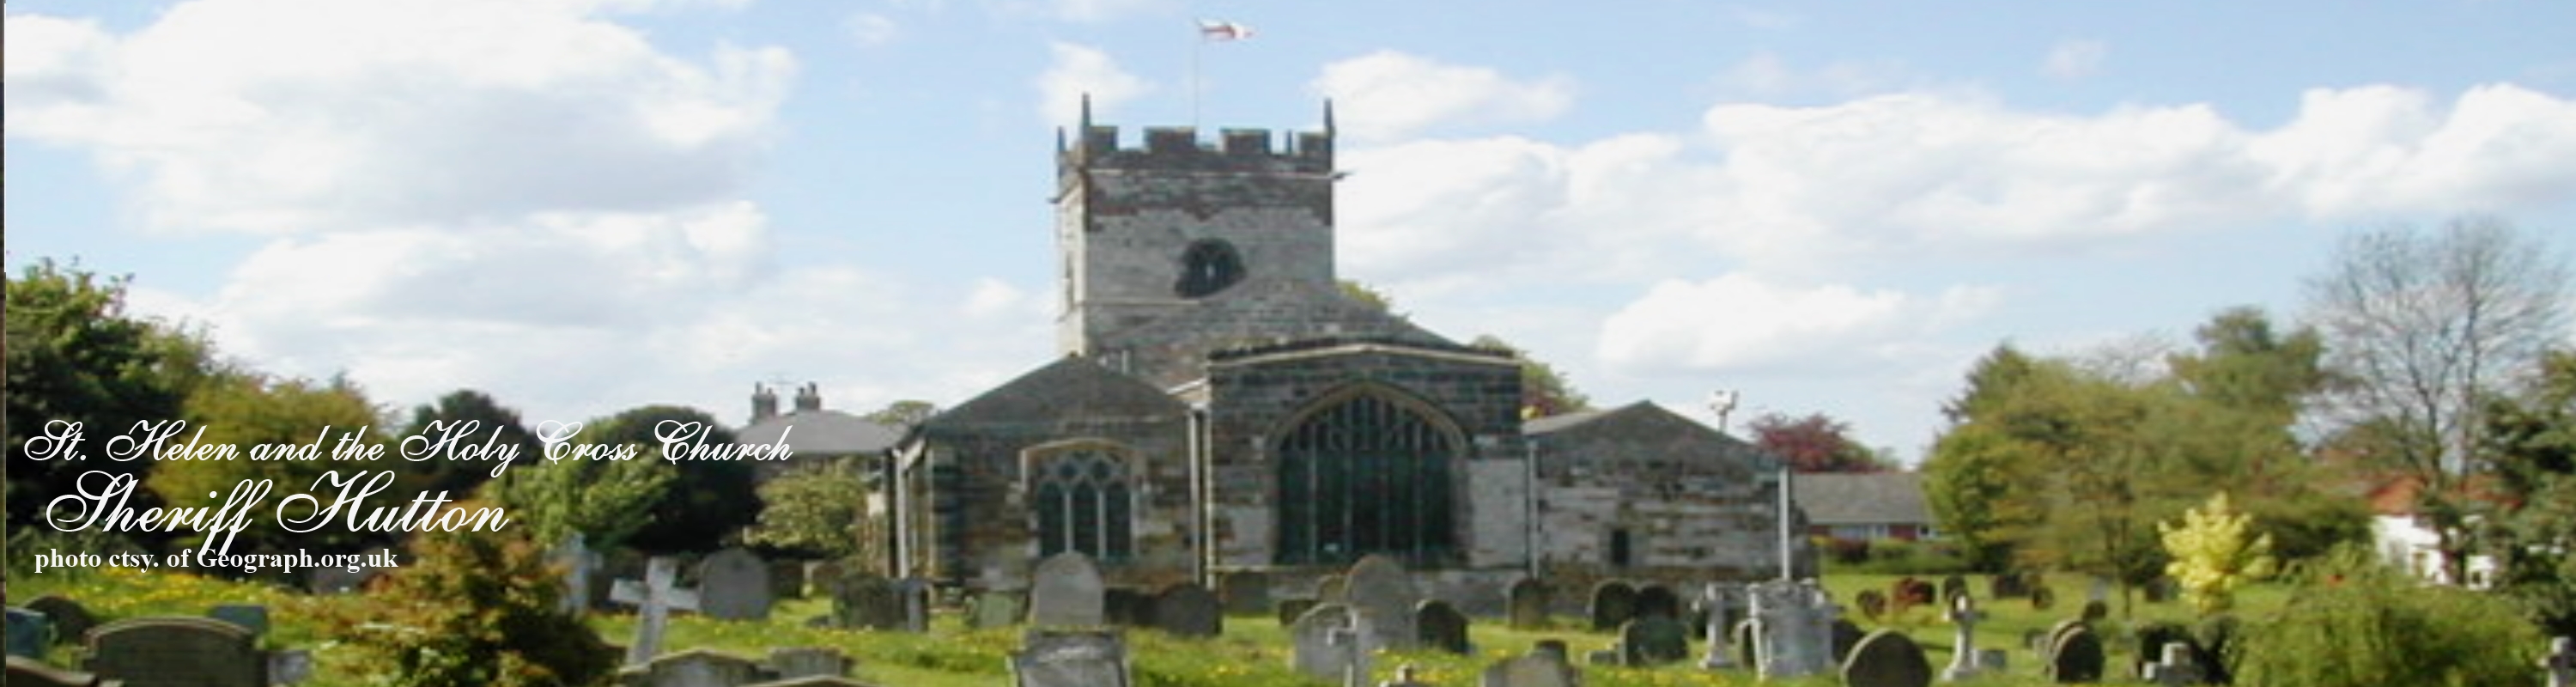 St. Helen and the Holy Cross Church - Sheriff Hutton